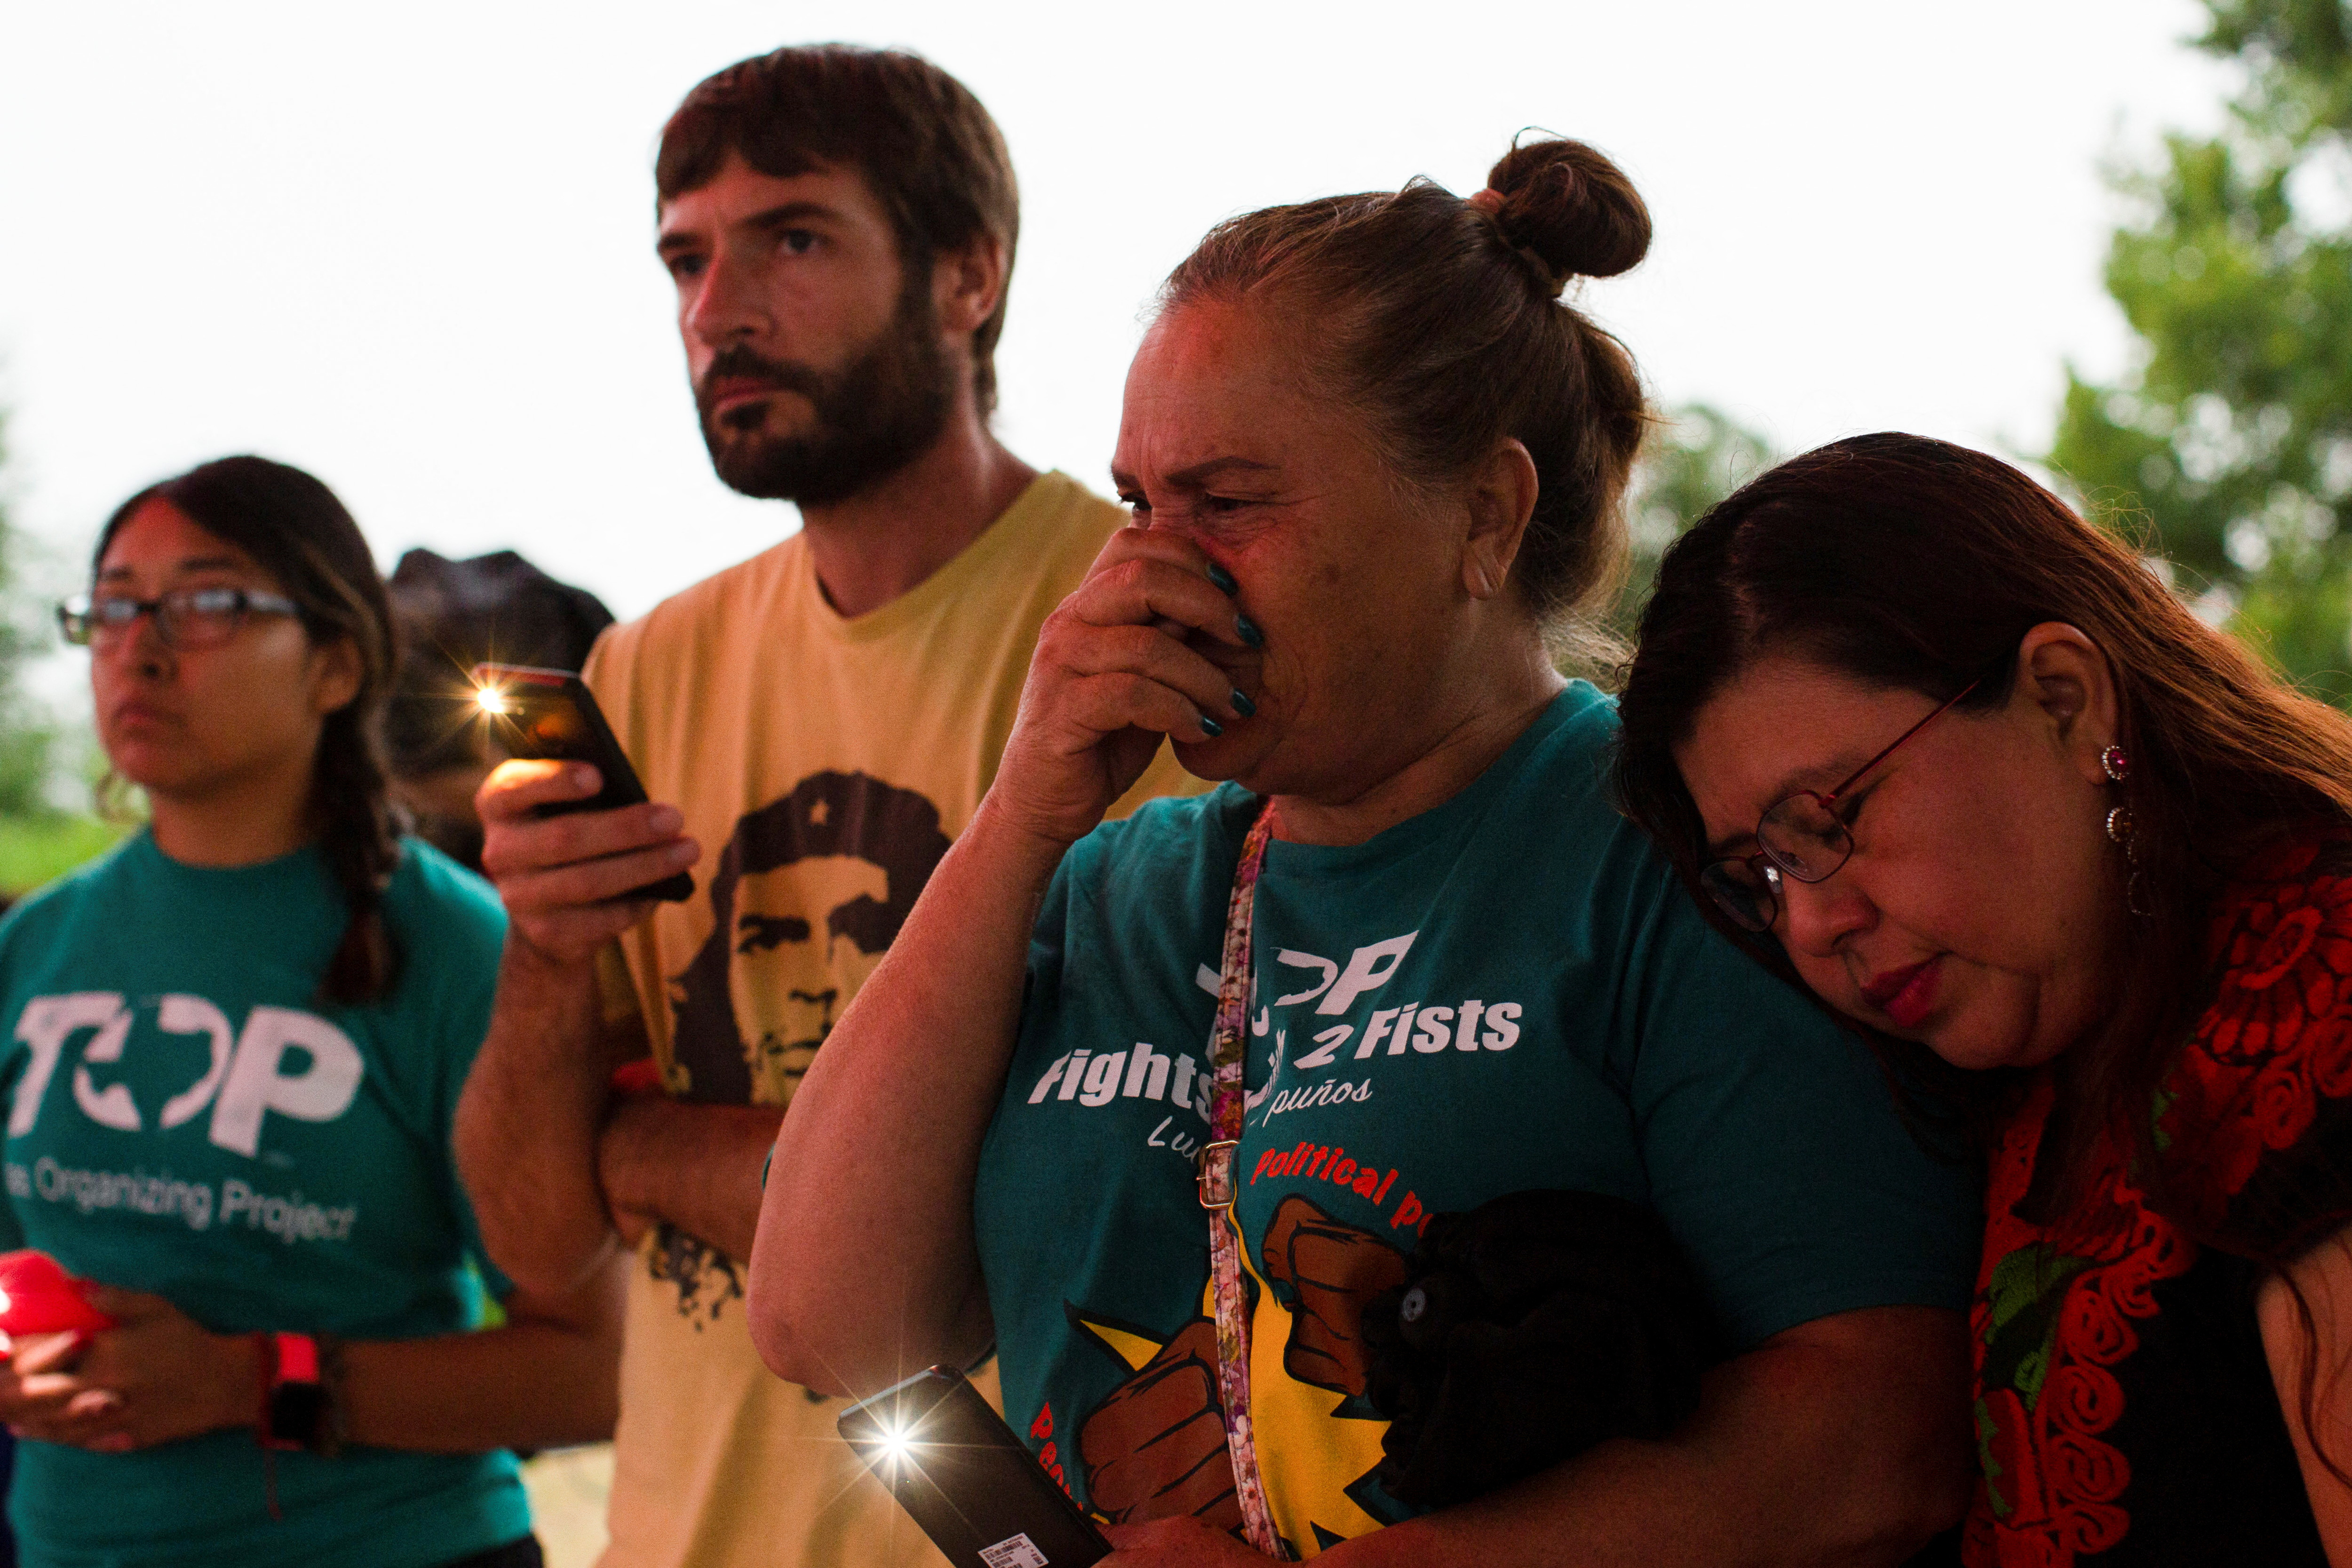 Andrea Osorio lamenting the tragedy of the migrants (Photo: REUTERS/Kaylee Greenlee Beal)